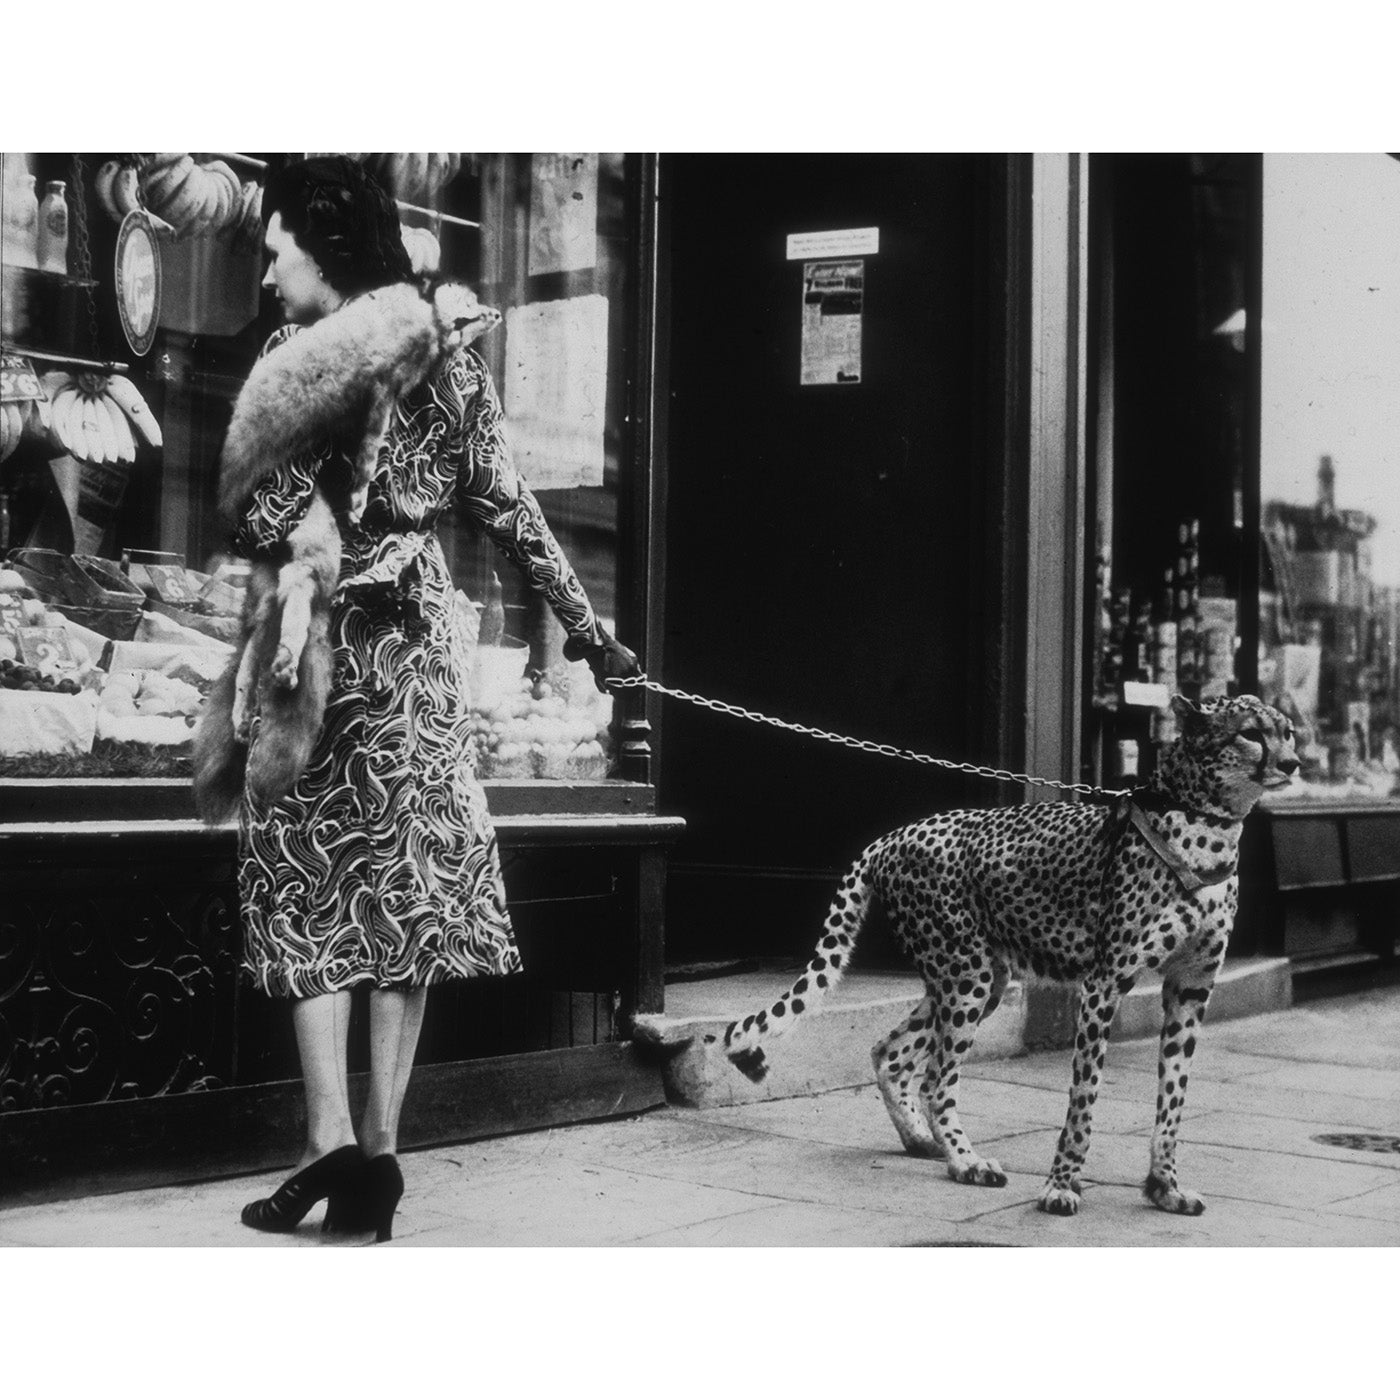 "Cheetah Who Shops" from Getty Images